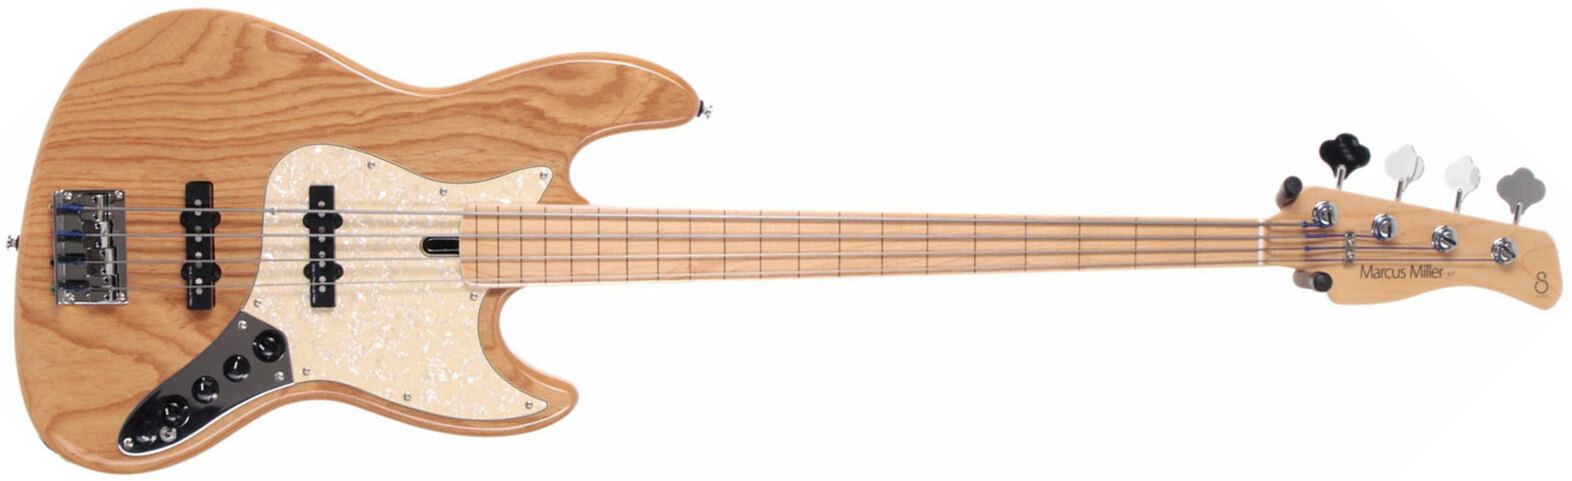 Marcus Miller V7 Swamp Ash Fretless 4st 2nd Generation Active Mn - Natural - Solid body electric bass - Main picture